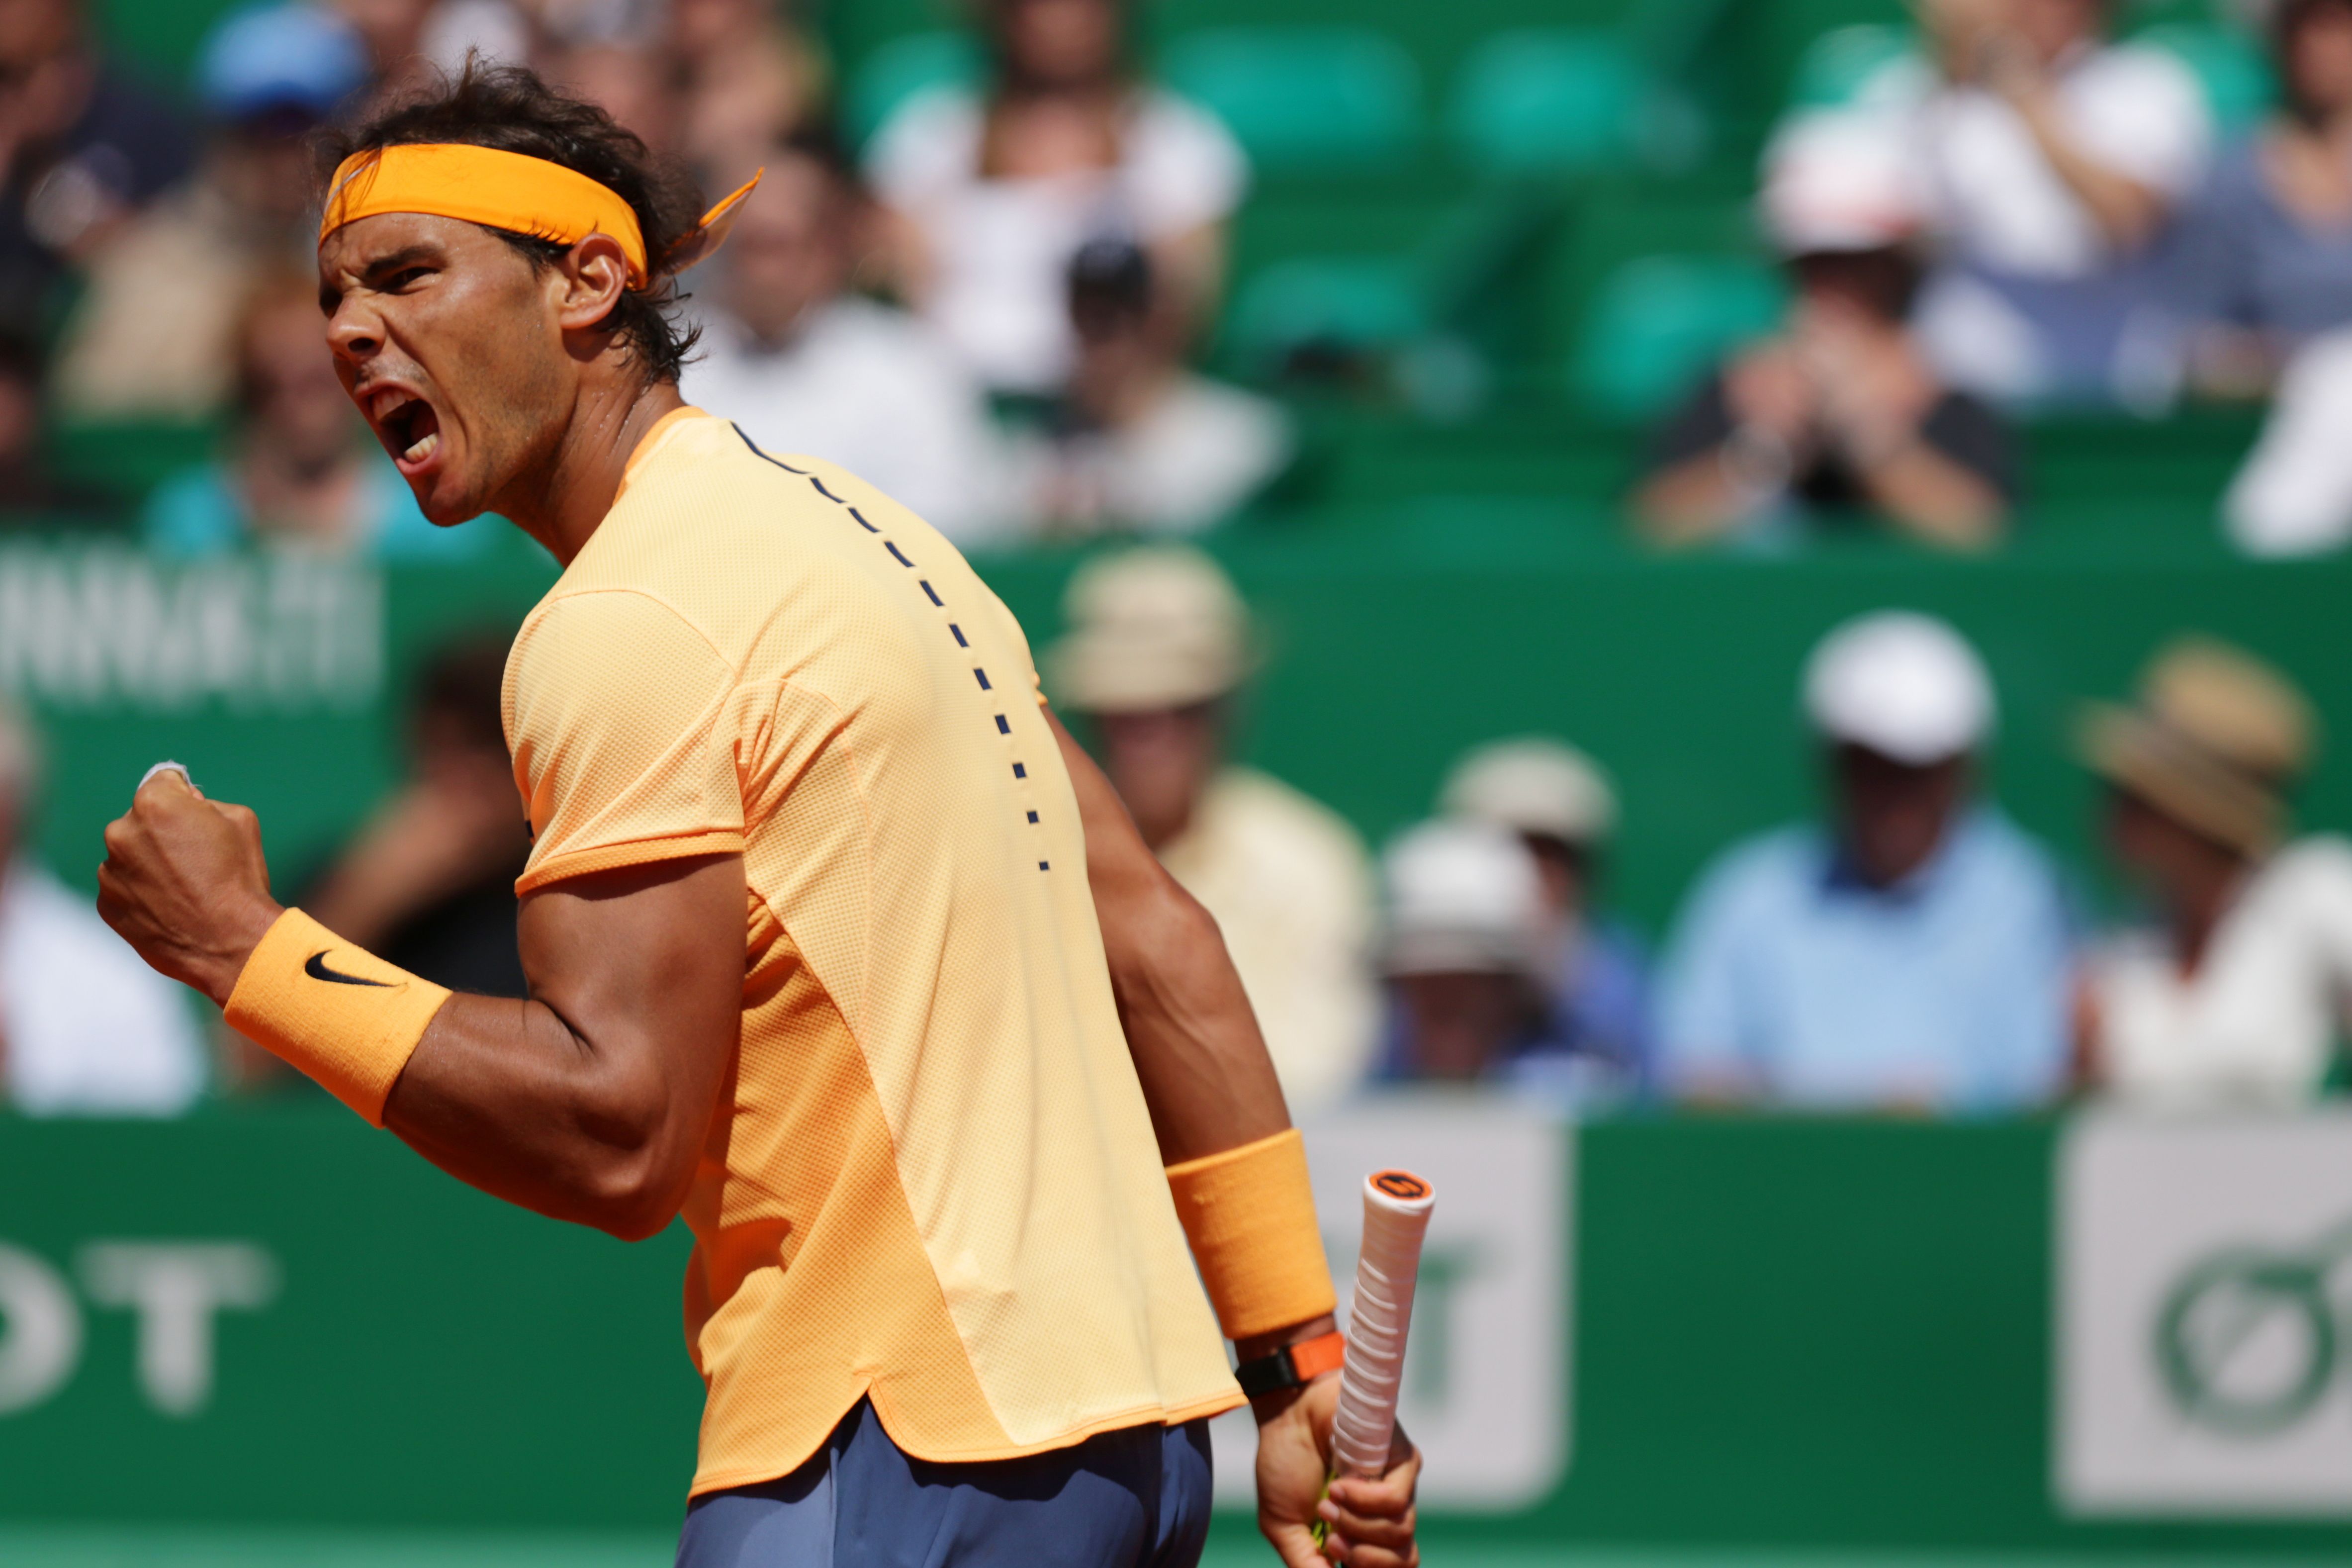 Rafael Nadal Is Ready to Resume Reign as the King of Clay in 2017 - Bleacher Report